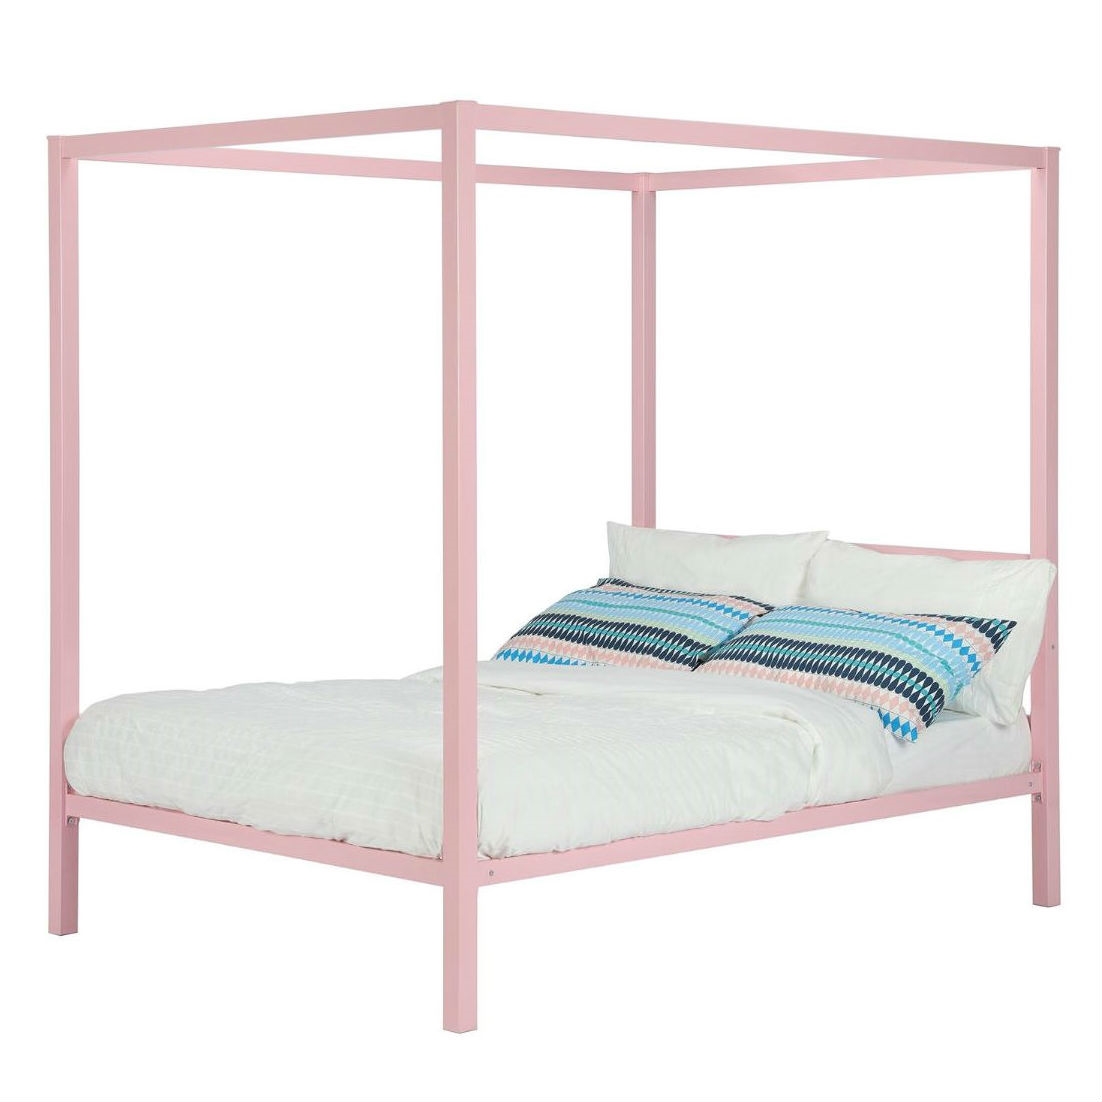 Full size Modern Pink Metal Canopy Bed